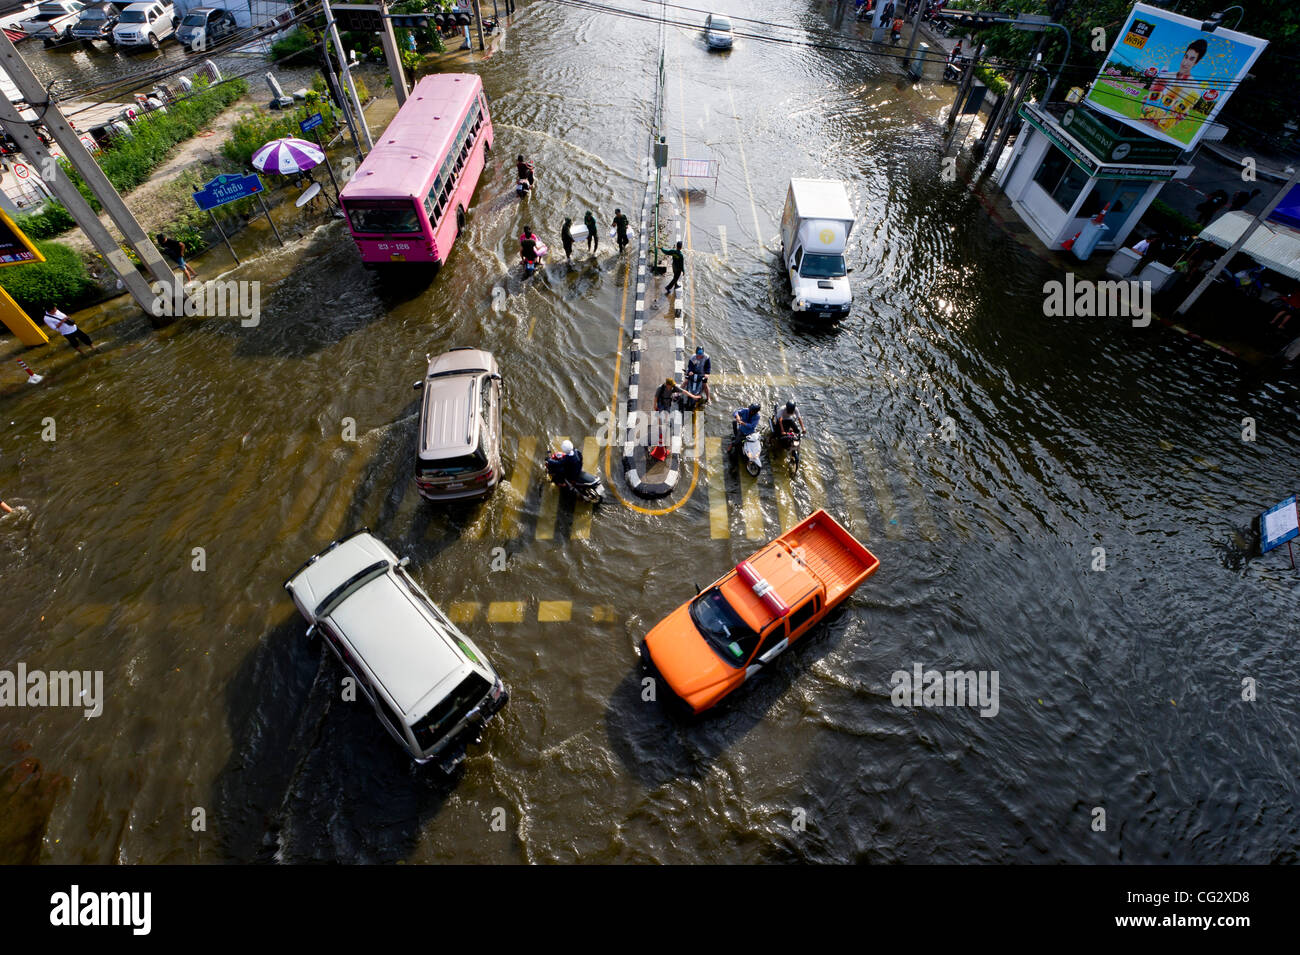 Nov. 4, 2011 - Bangkok, Thailand - People drive and walk through floodwaters as they creep further into the center of the city. Thailand is suffering from it's worst flooding in 50 years. Around 430 people have died since late July according to Department of Disaster Prevention and Mitigation. (Cred Stock Photo